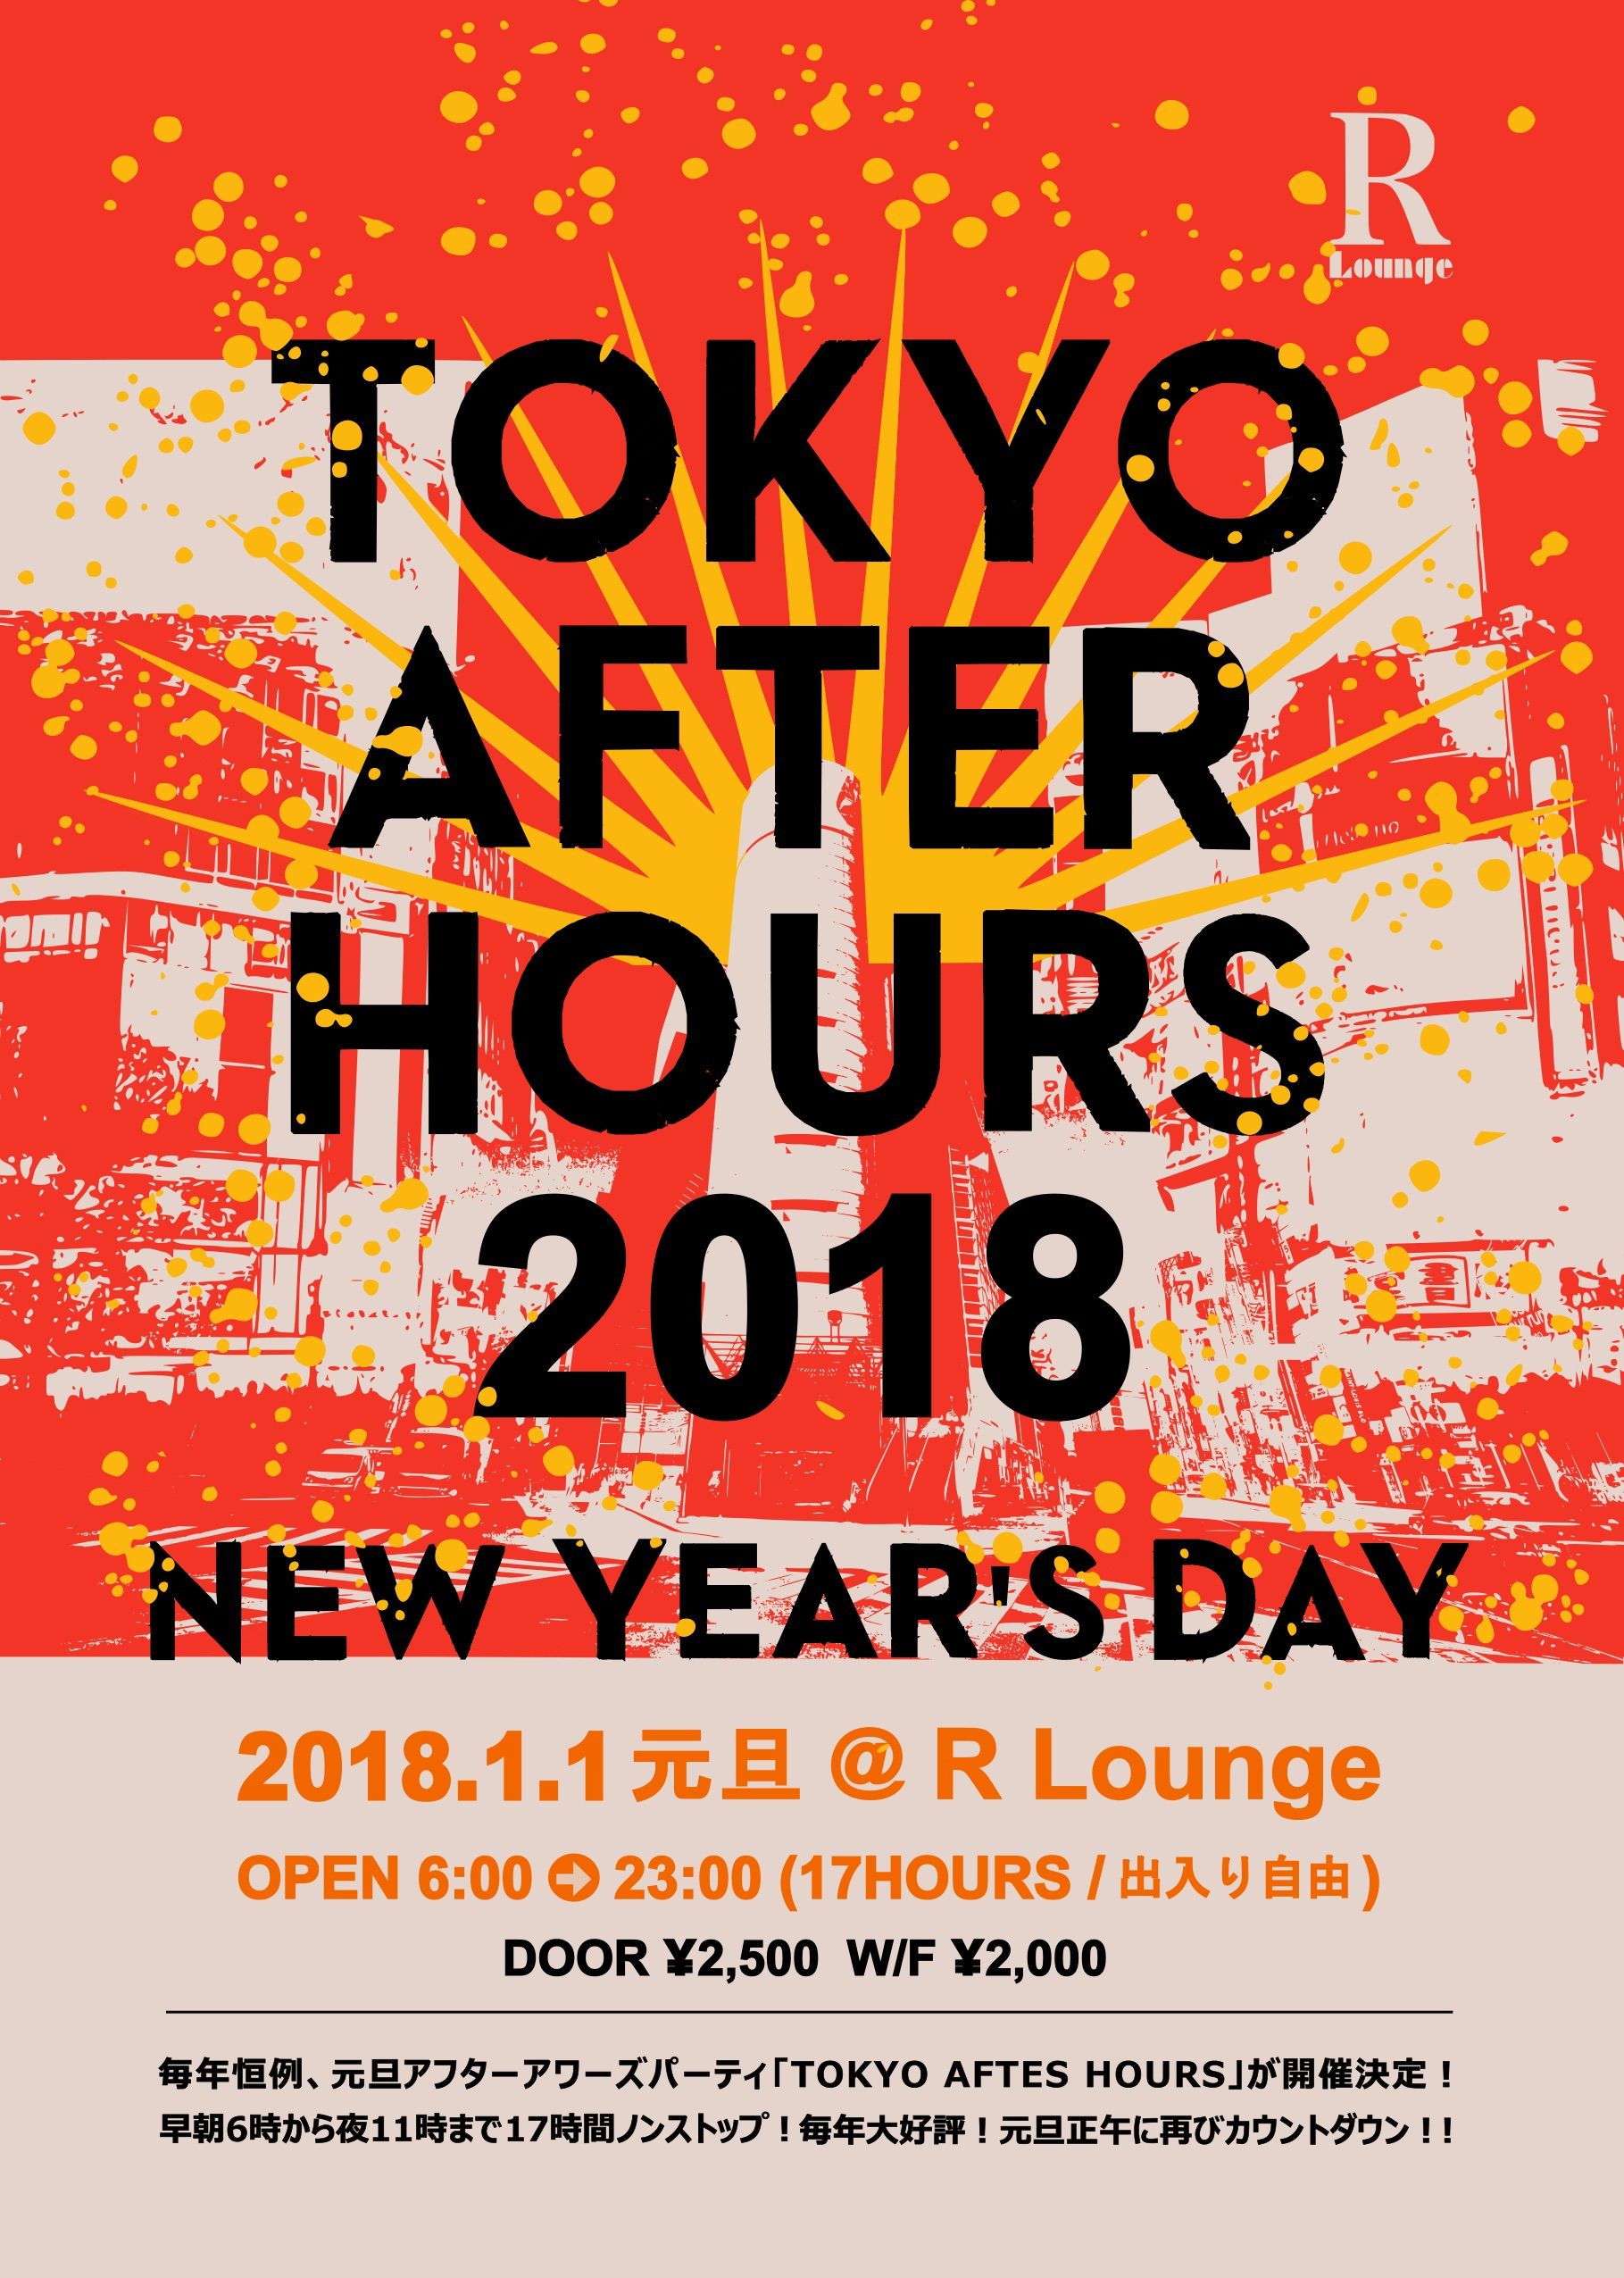 TOKYO AFTER HOURS 2018 -New Year's Day-